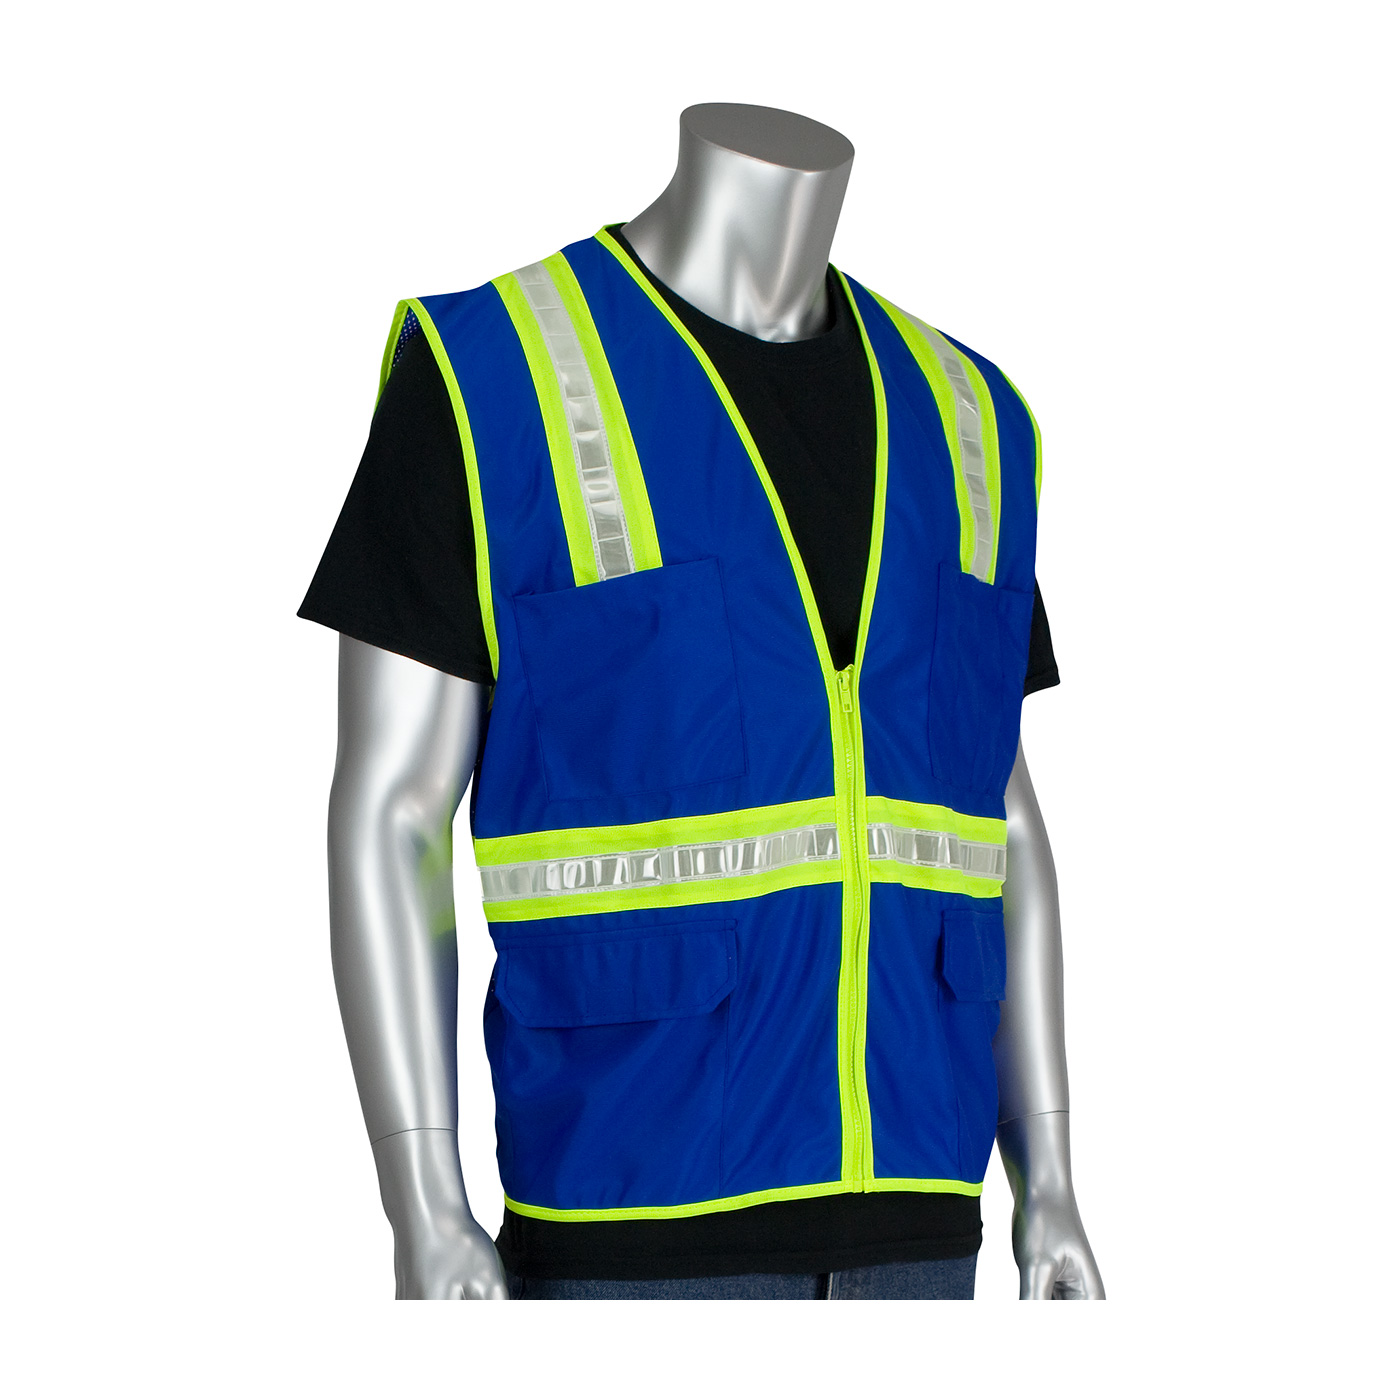 PIP 300-1000-BL/L Non-ANSI Surveyor's Style Safety Vest with a Solid Front, Mesh Back and Prismatic Tape - Large PID-300 1000 BL LG